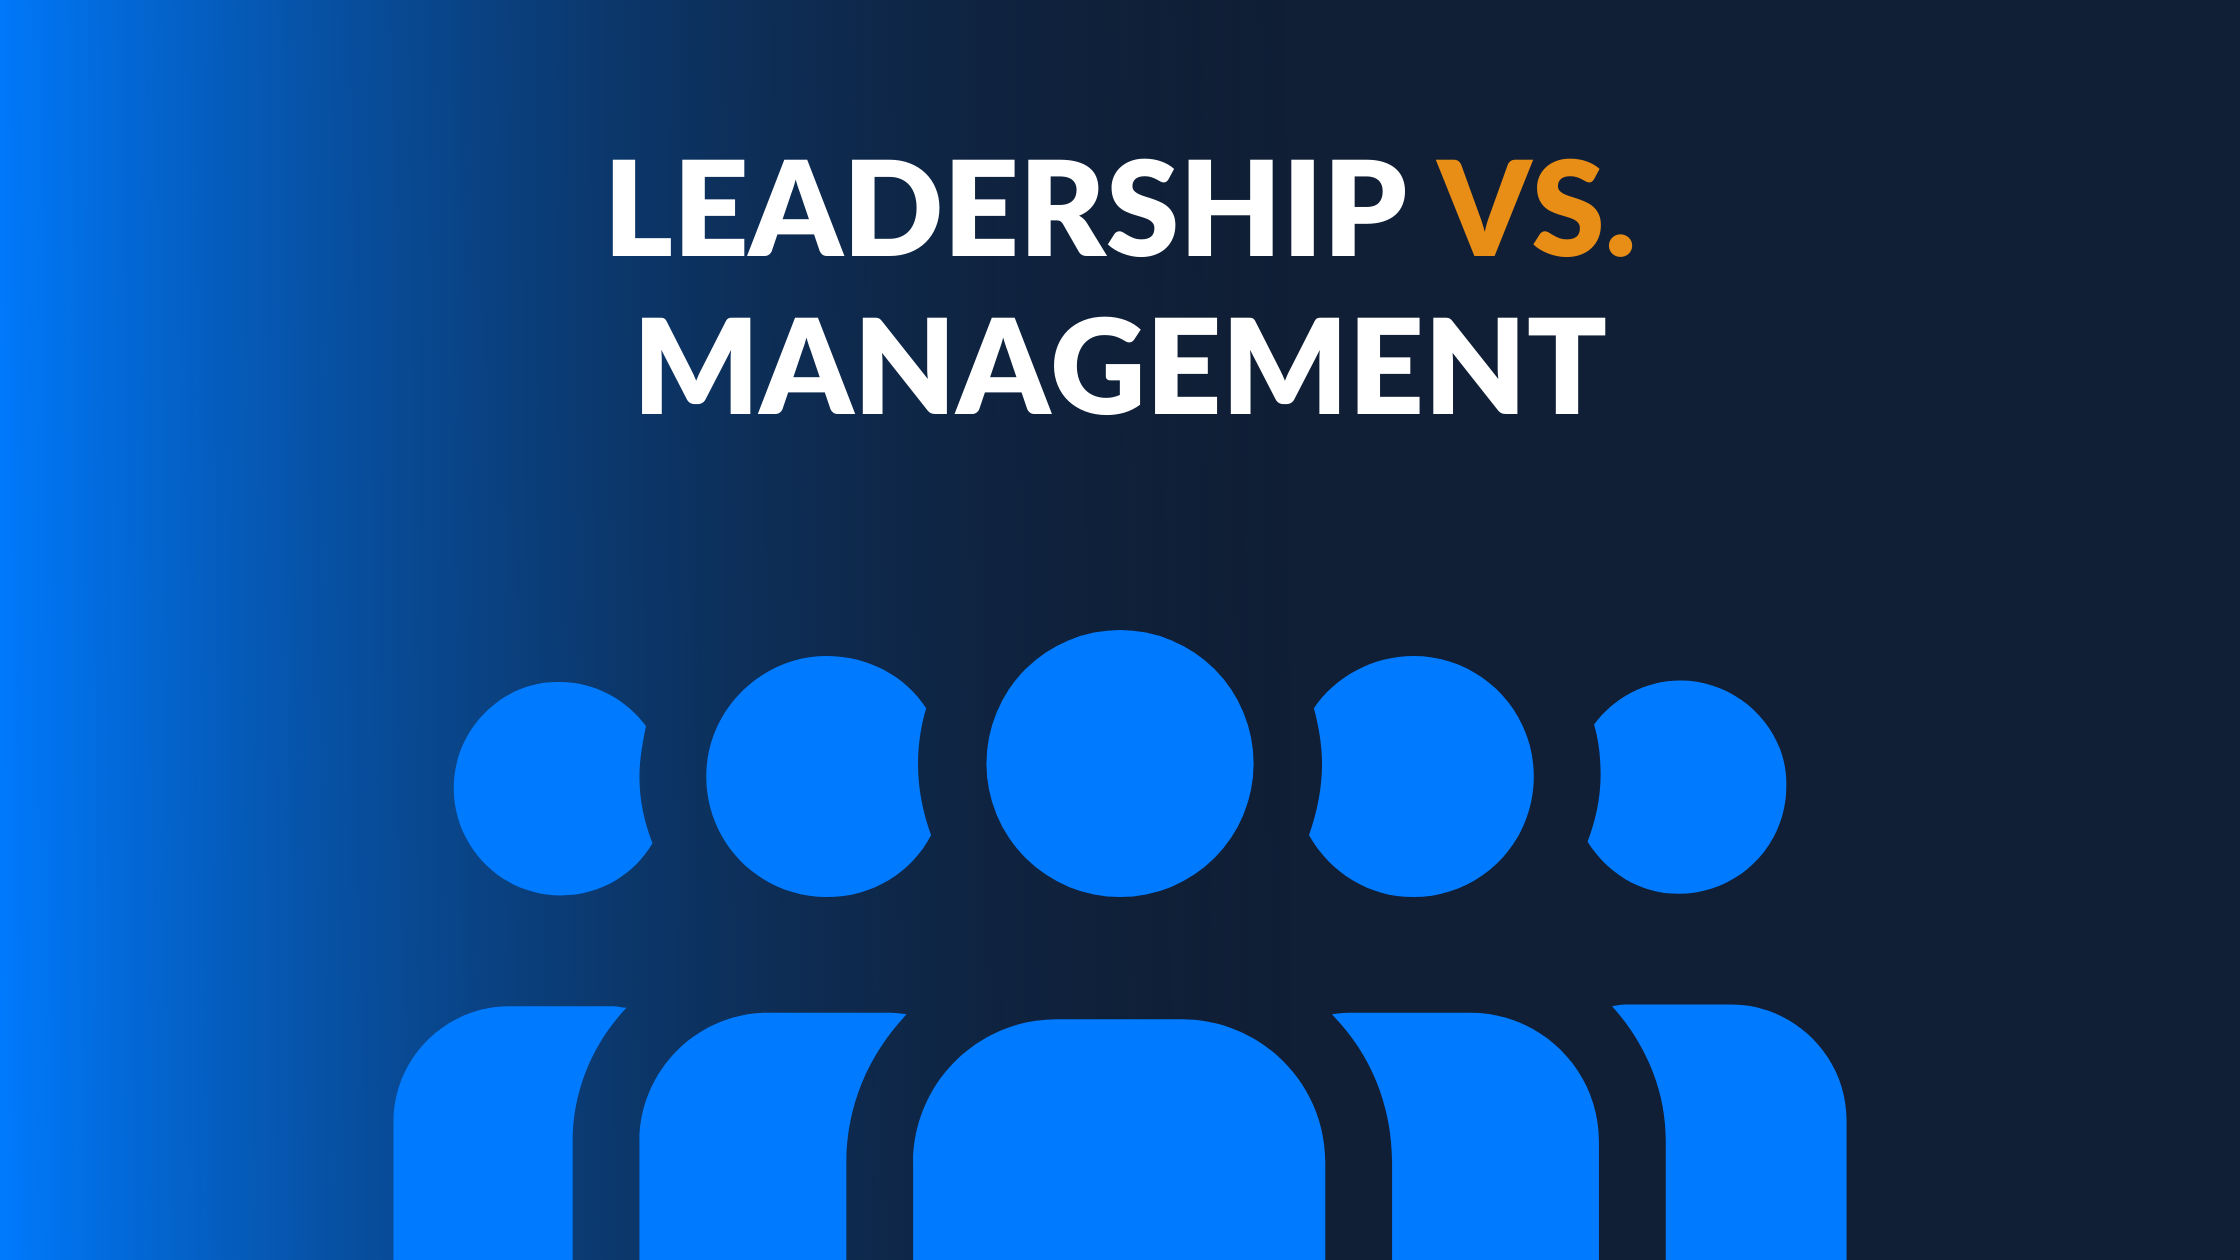 what are some differences between leadership and management